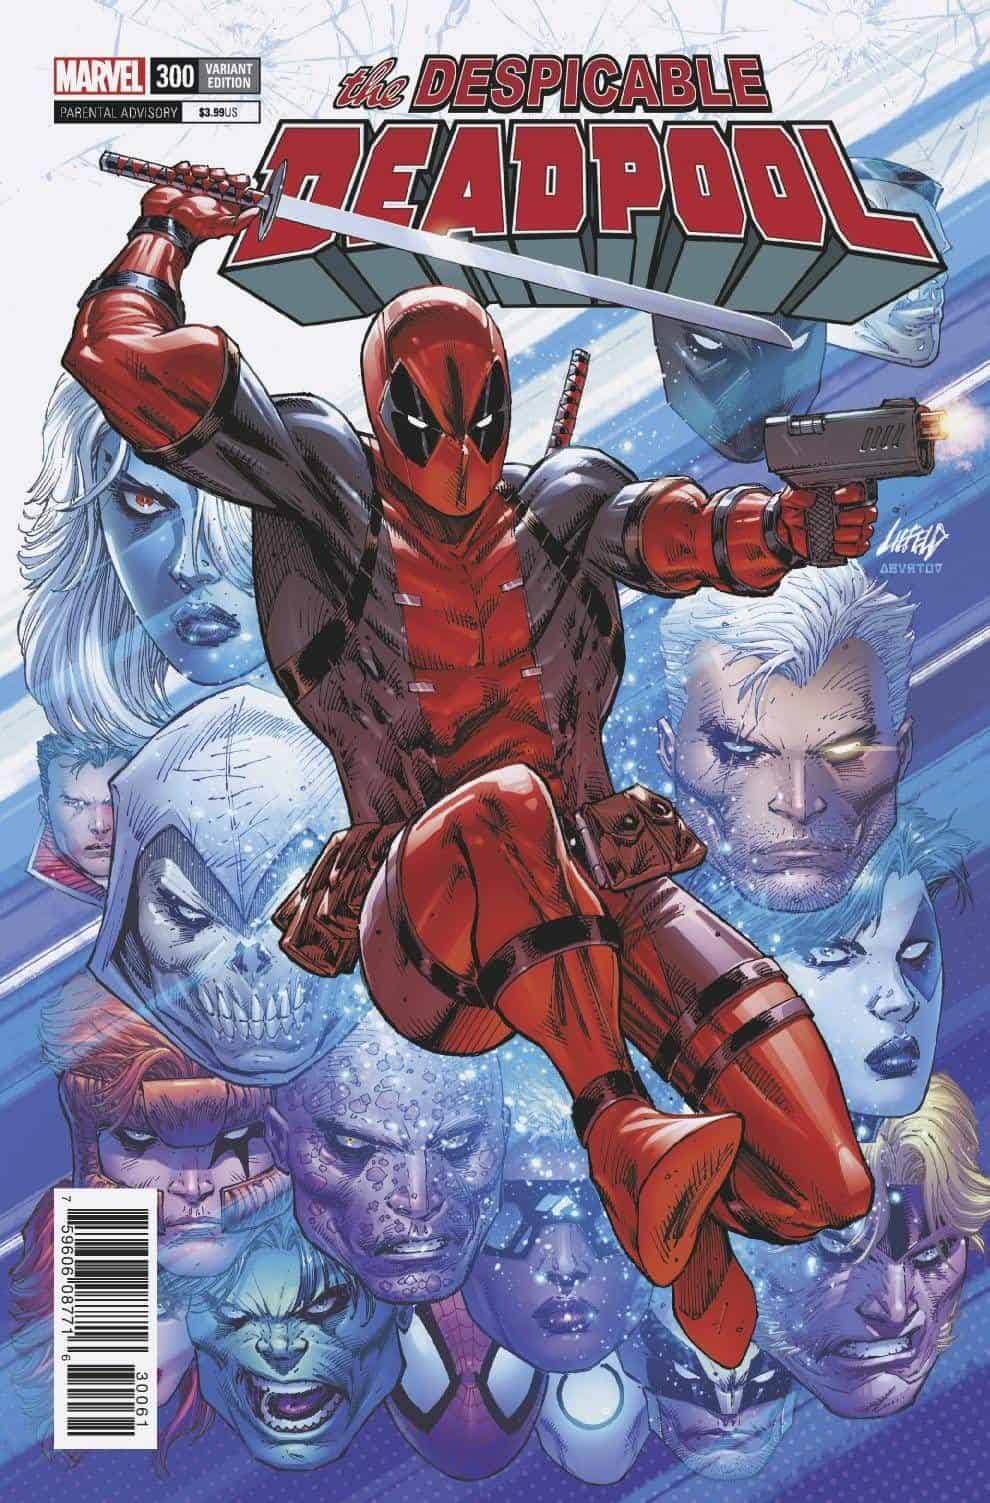 Marvel Comics & The Despicable Deadpool 300 Spoilers The